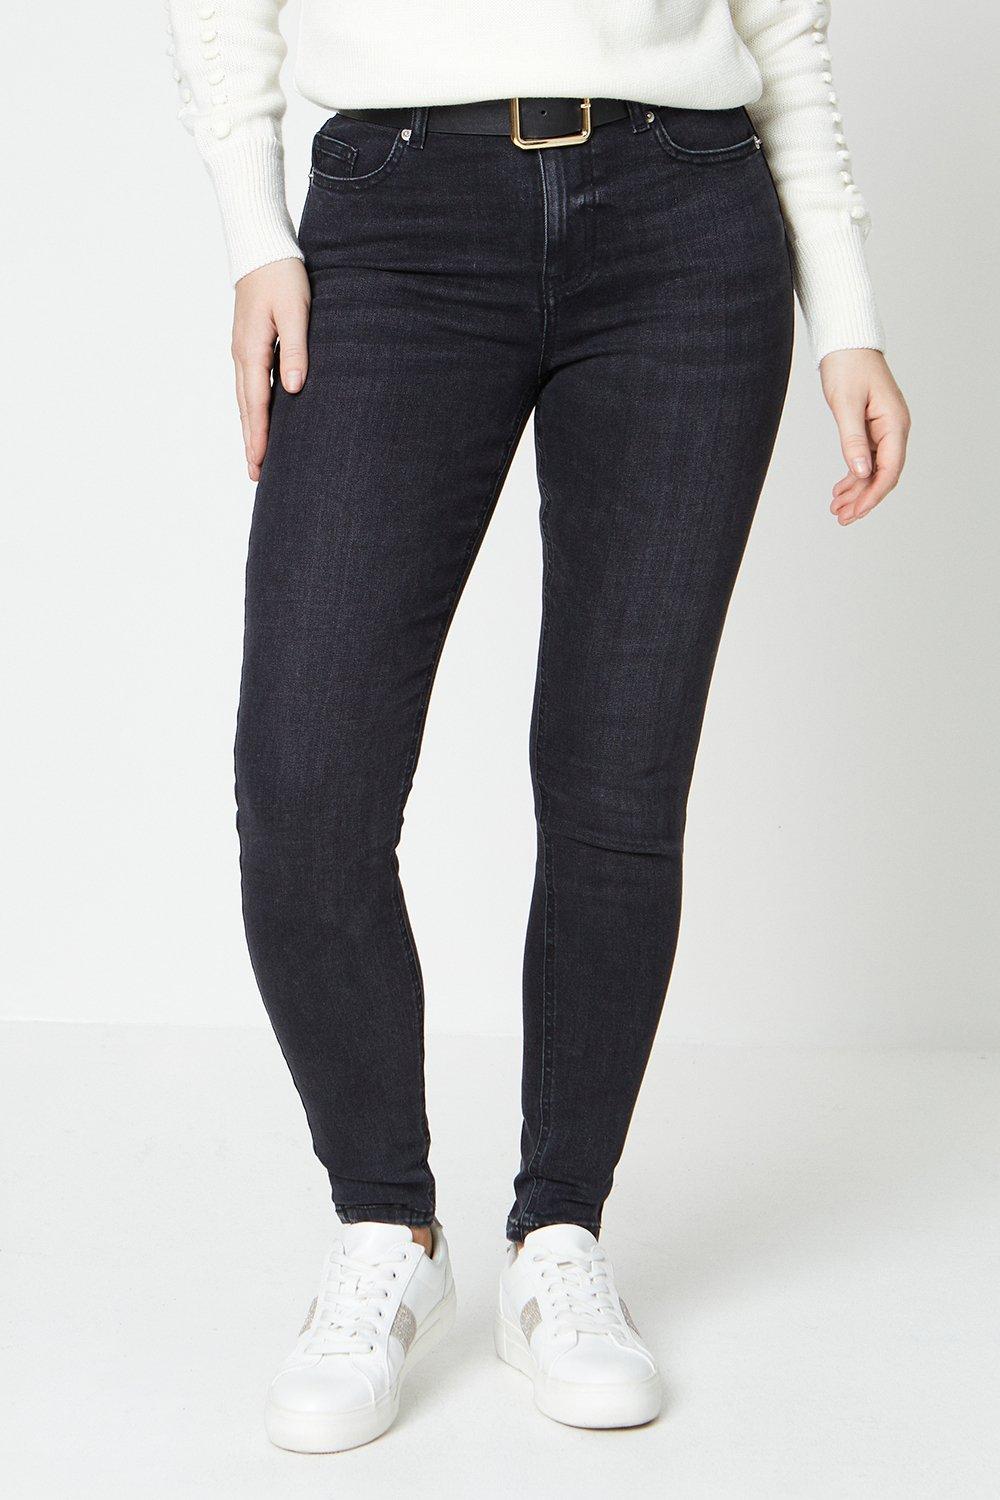 Women's High Rise Skinny Jeans - washed black - 14